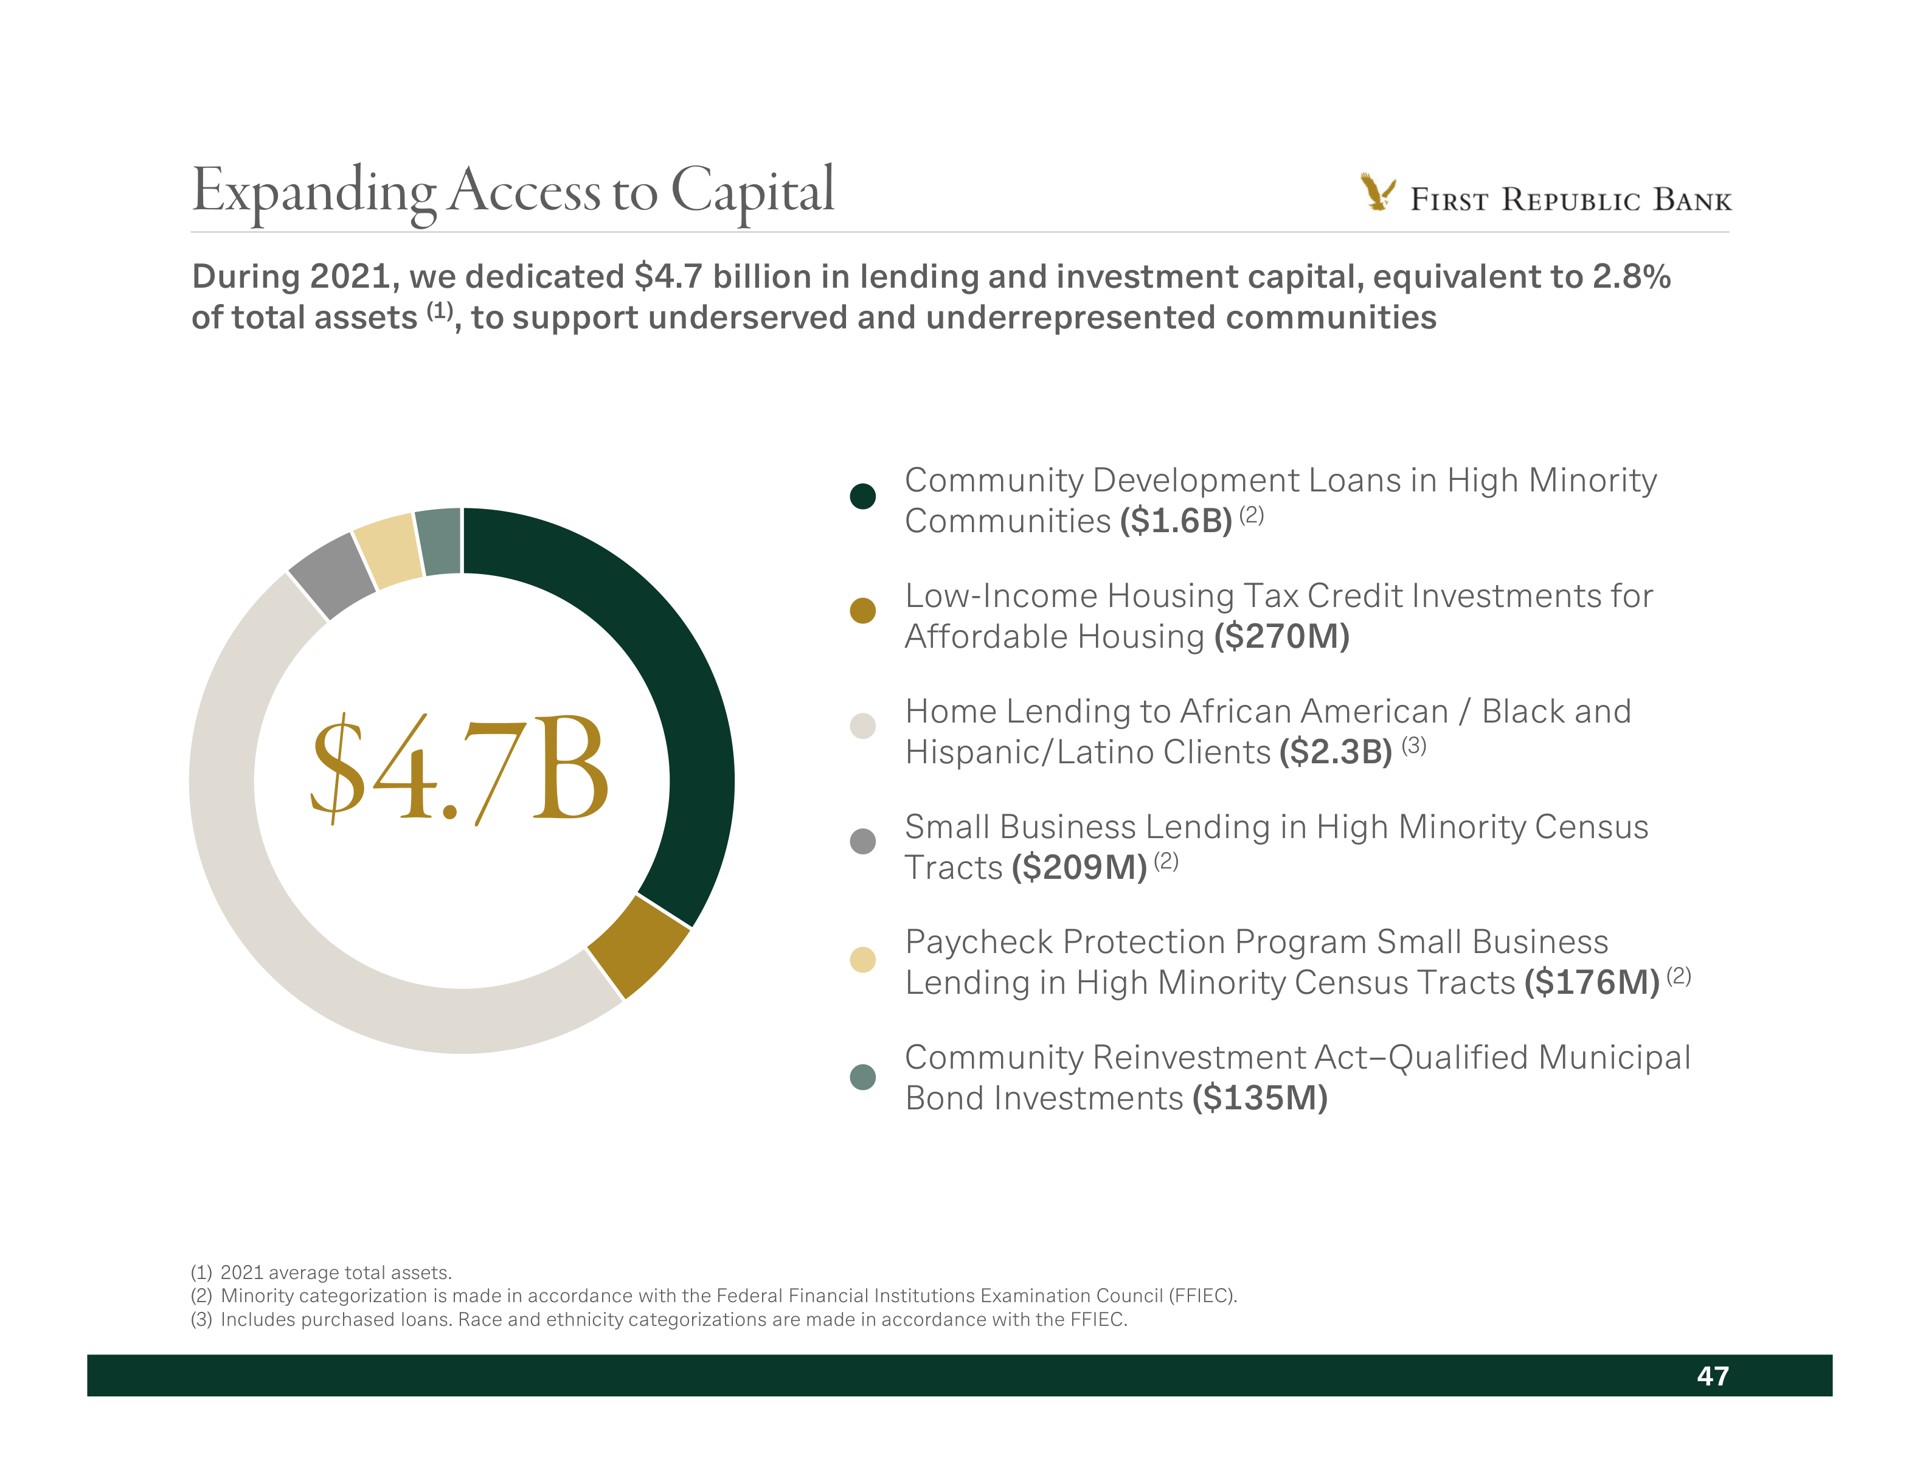 expanding access to capital a communities lending in high minority census tracts bond investments | First Republic Bank